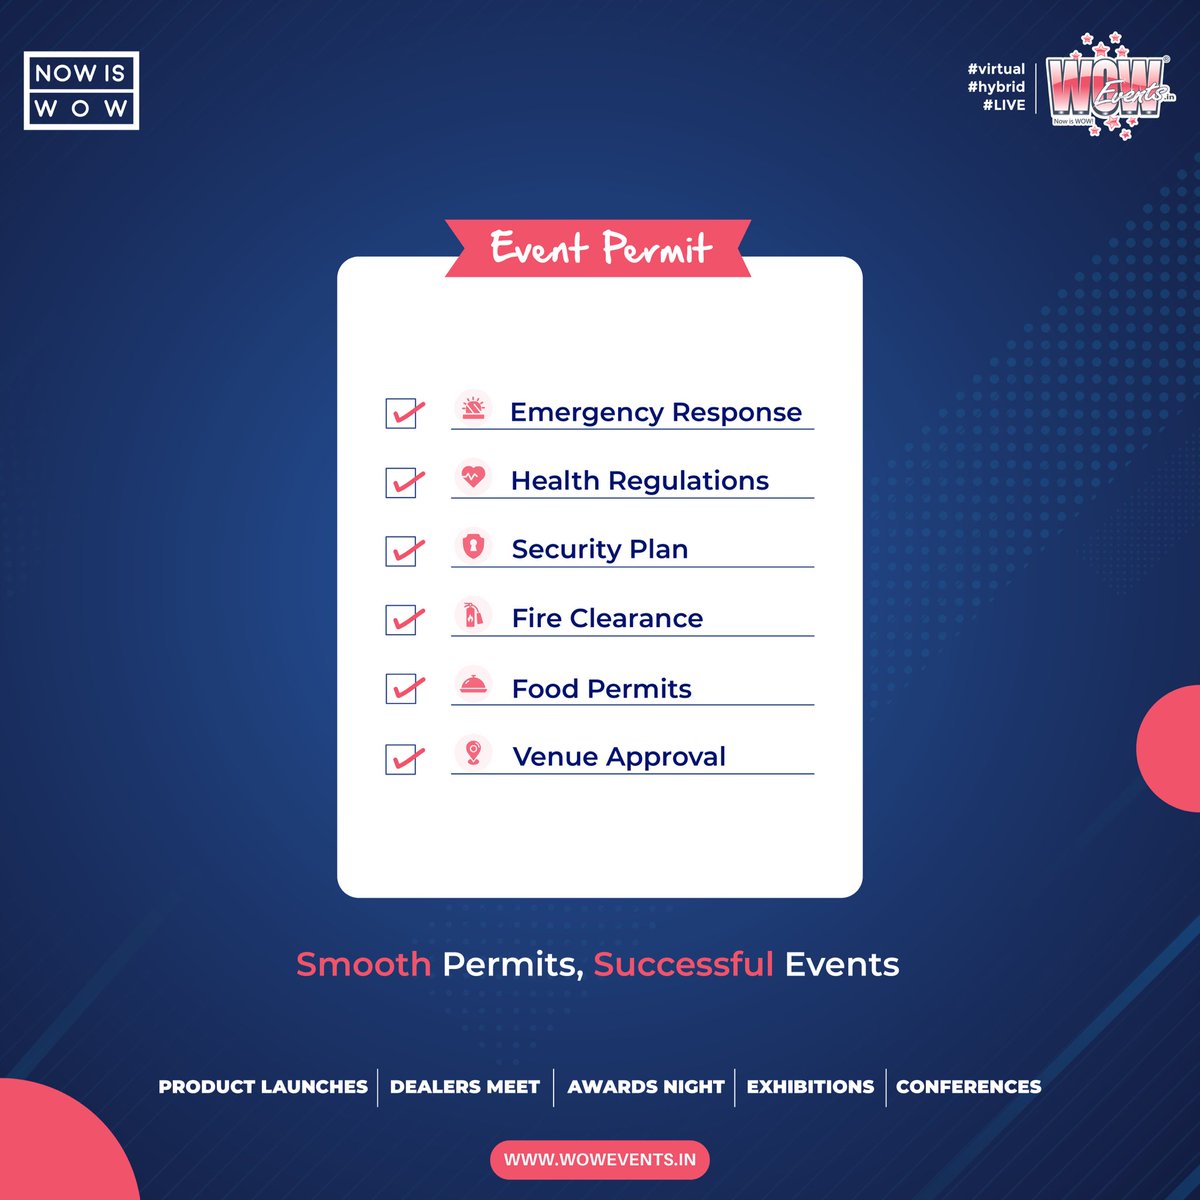 Getting permits and approvals is no small feat. Use this checklist to stay on top of things! ✅ #Compliance #EventPermits

#WOWEvents #NOWISWOW #eventprofs #EventCompliance #PermitSuccess #EventSafety #RegulatoryApprovals #CompliantEvents #EventSecurity #SafetyFirst